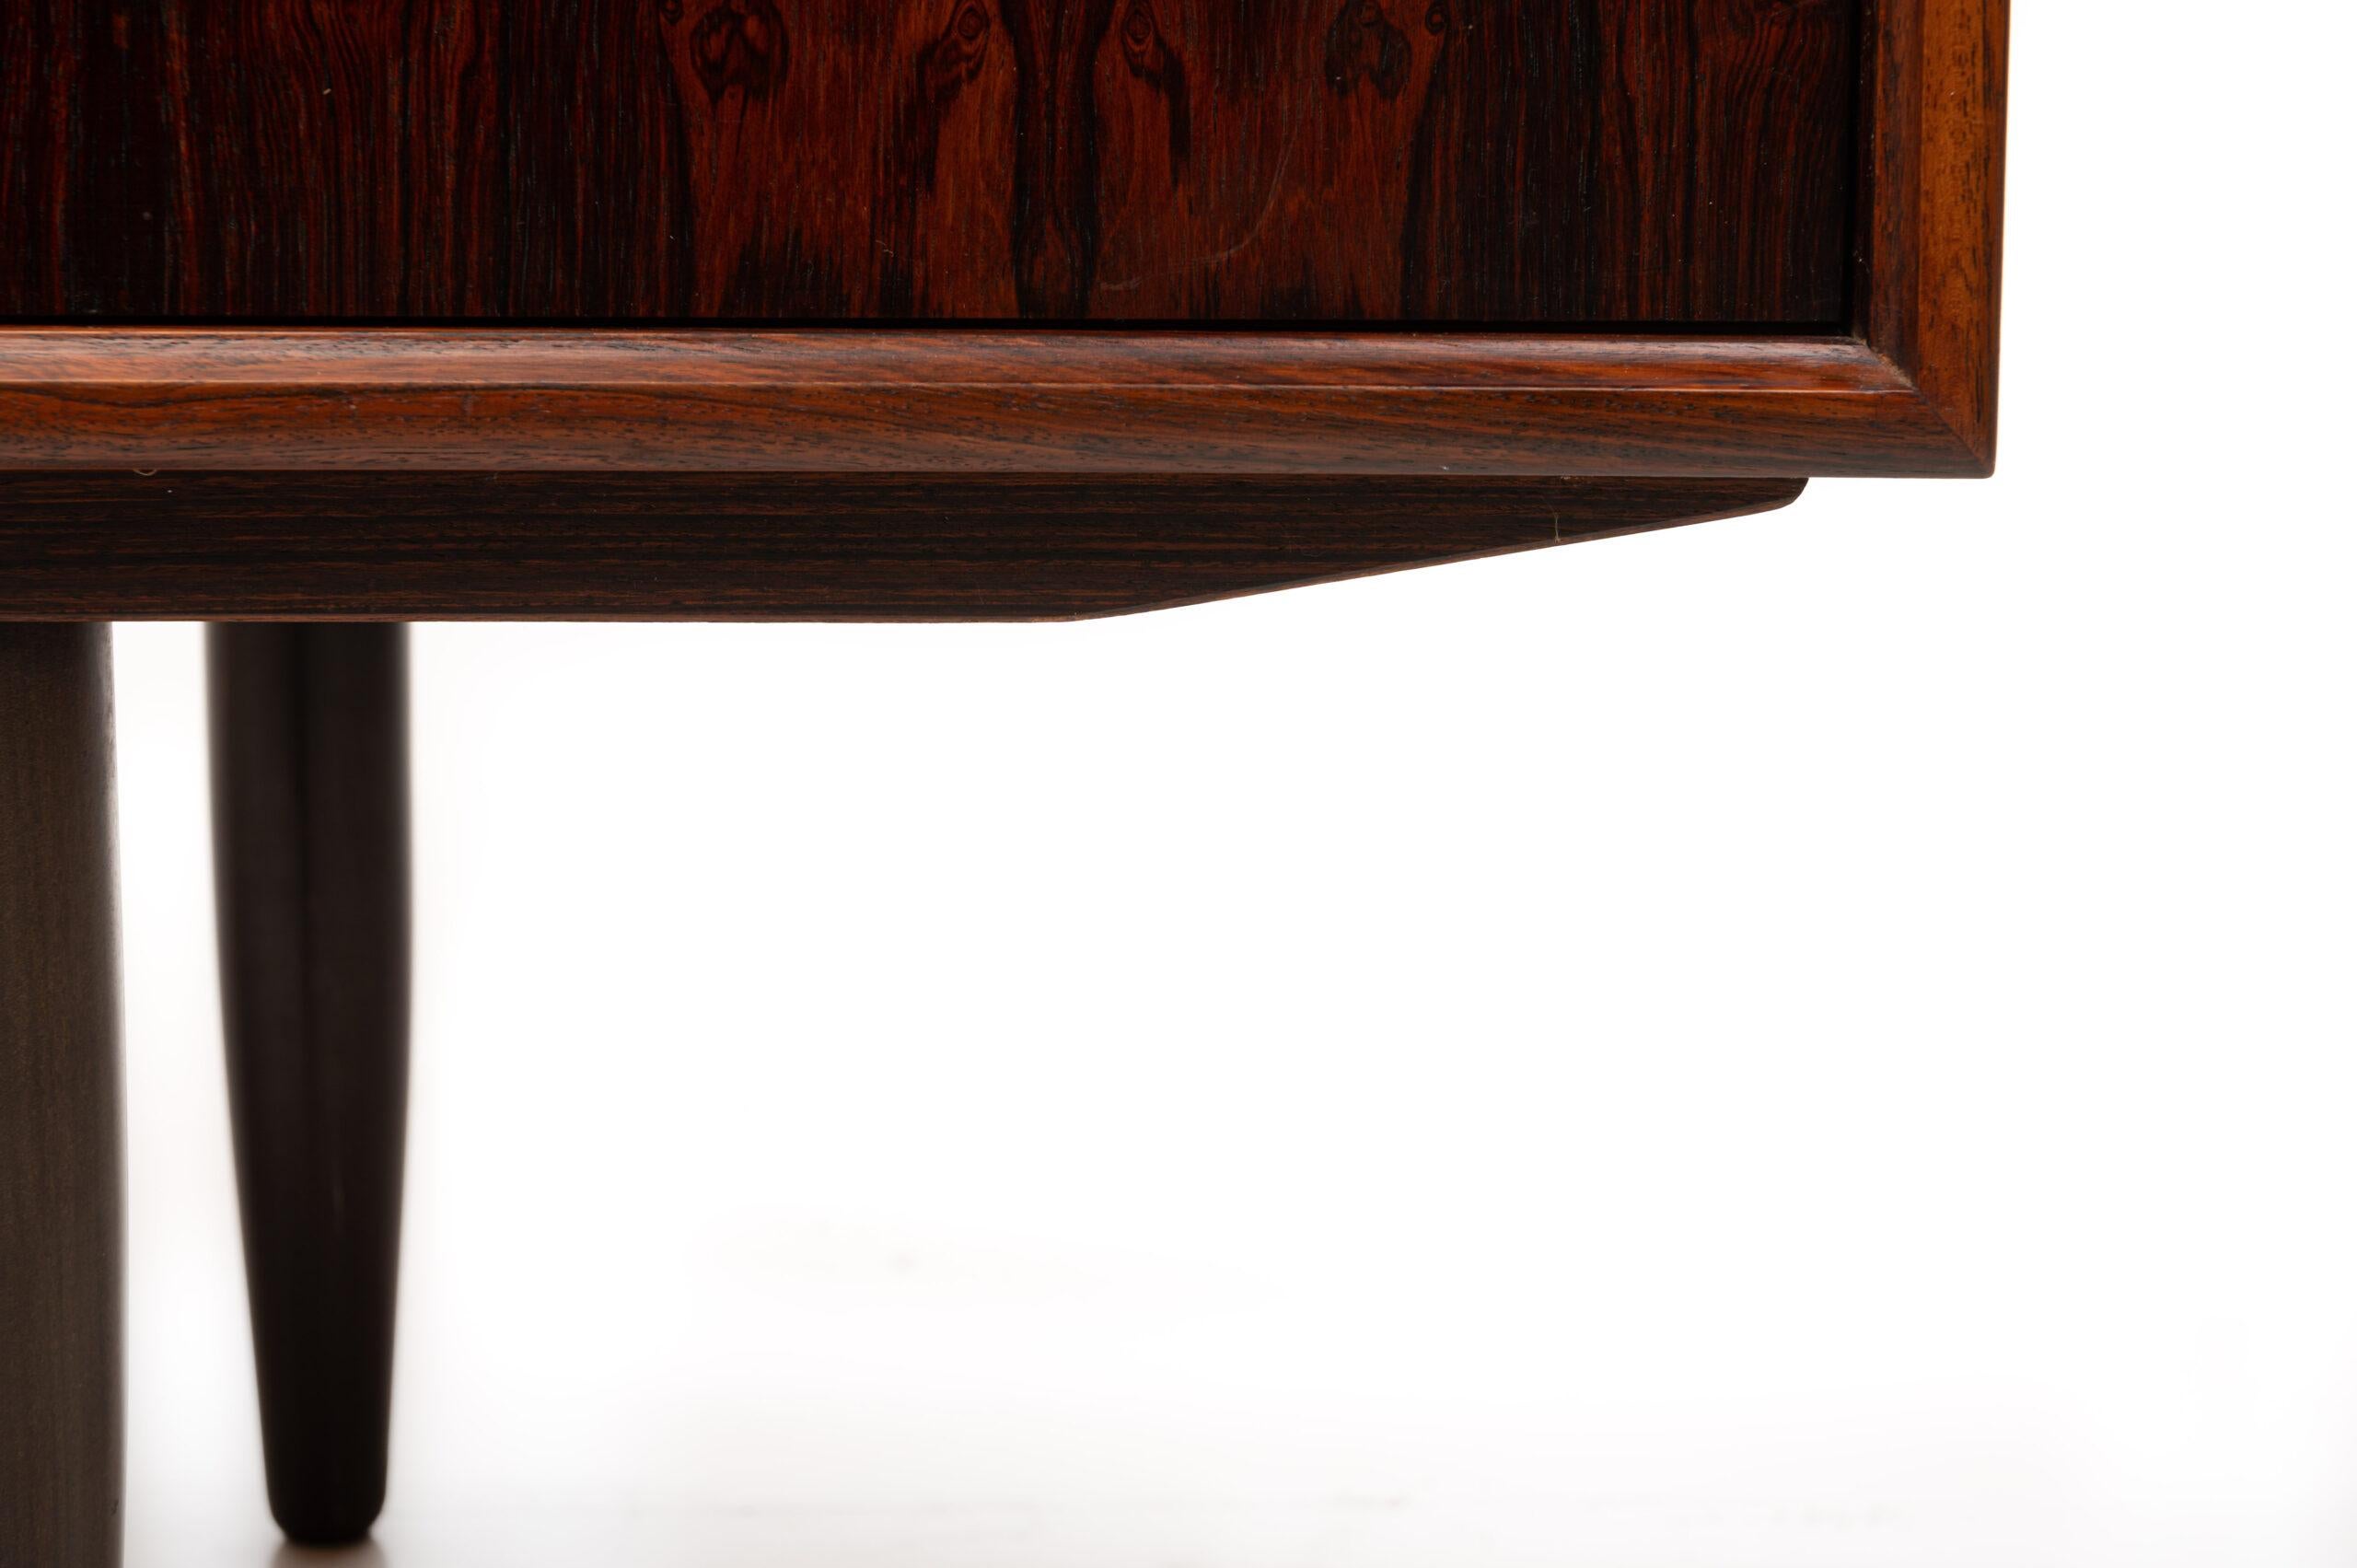 Rare Rosewood Buffet Sideboard by Axel Christensen for ACO Møbler, Denmark 1960s For Sale 3